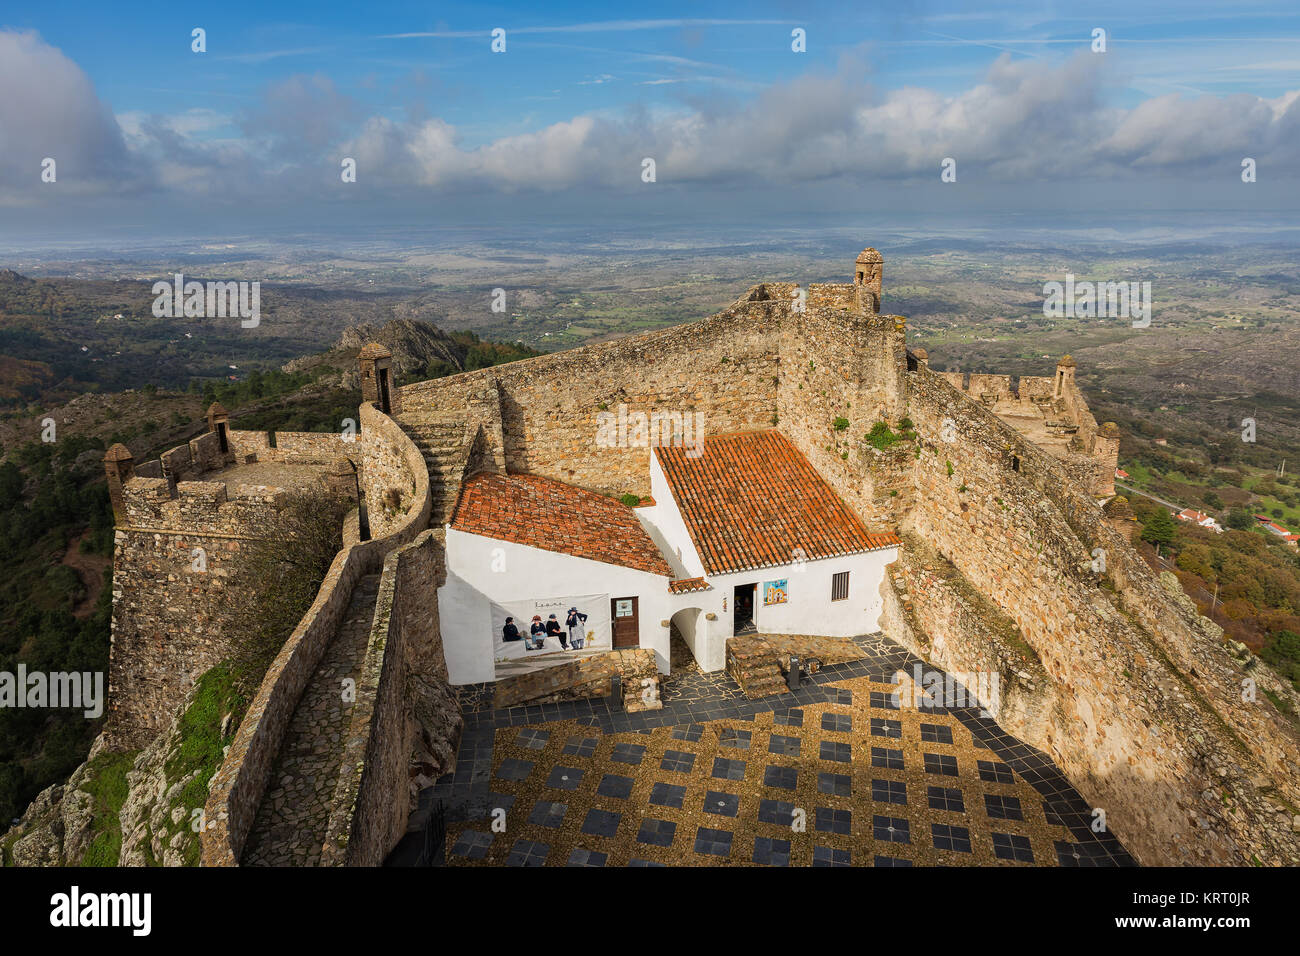 Photographed from the old military fortress Marvão. Portugal. Stock Photo